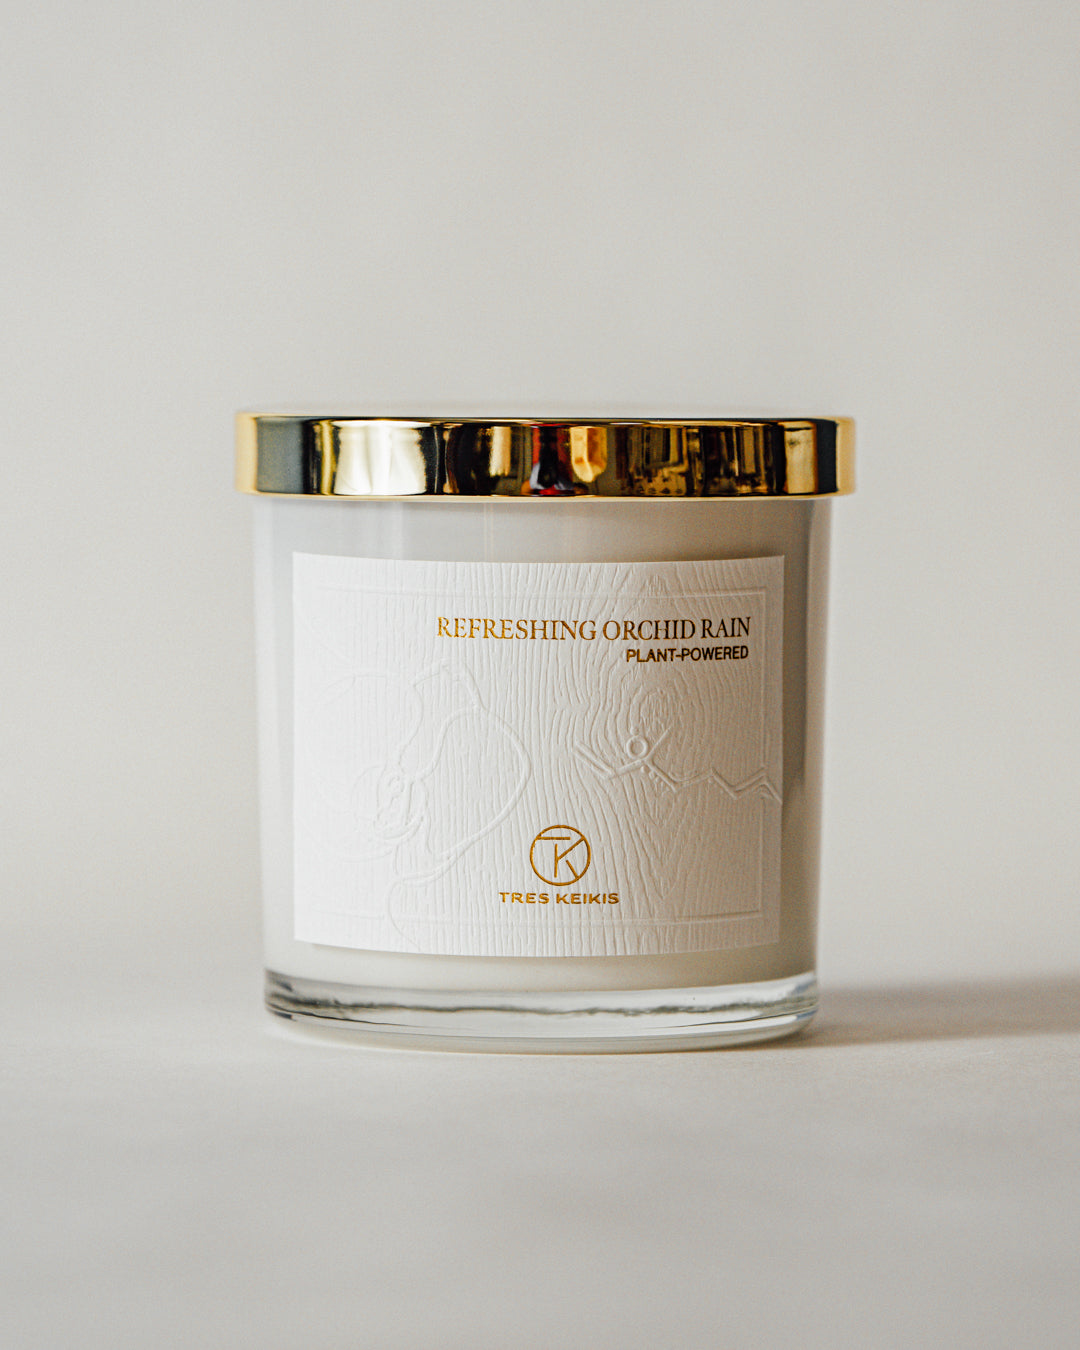 A candle in a clear glass jar with shiny gold lid and a wood-textured white label with embossed plant and molecule art. The words Refreshing Orchid Rain and the Tres Keikis logo are printed in gold foil. The jar is on a continuous white backdrop.